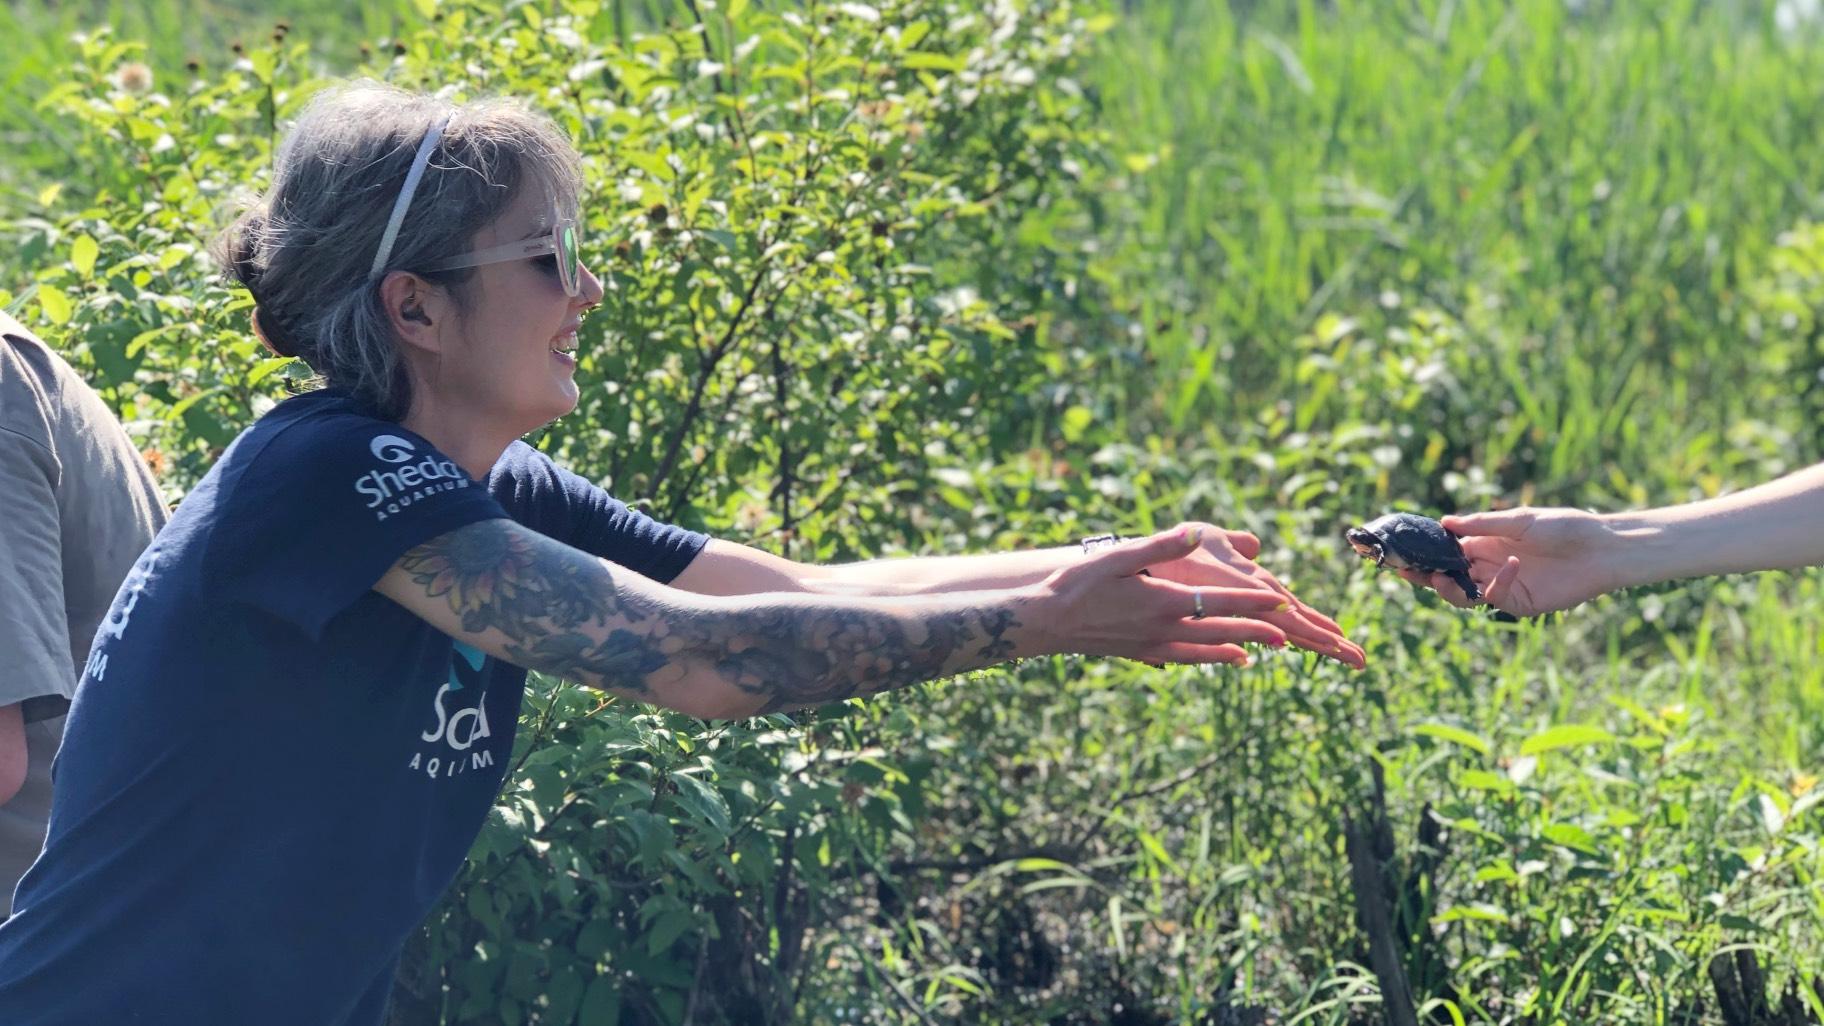 Steph Goehring, an aquarist at Shedd Aquarium, takes a hand-off of a baby Blanding's turtle, to release it into a Cook County forest preserve wetland. (Patty Wetli / WTTW News)